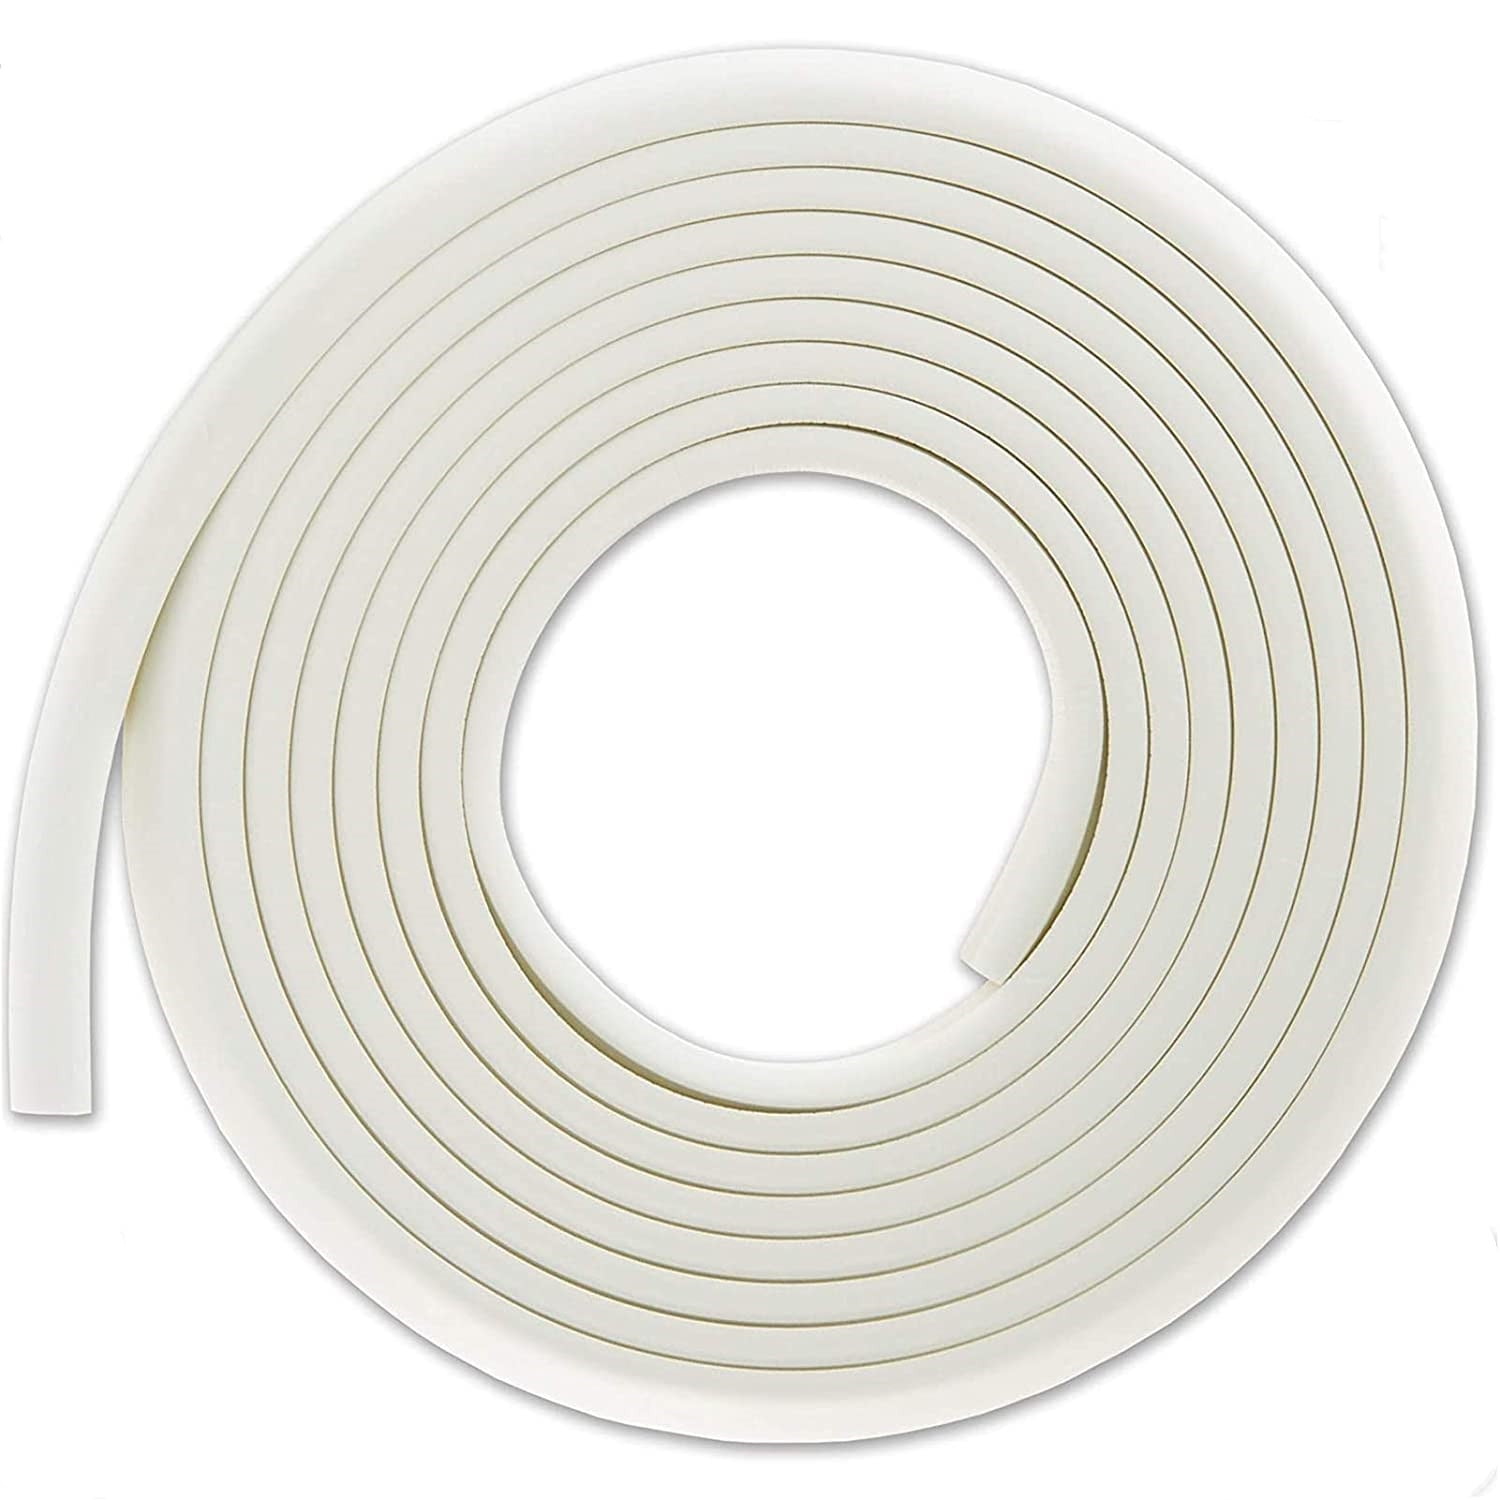 1pc Beige Baby Safety Furniture Edge and Corner Bumper Guards, 6.5